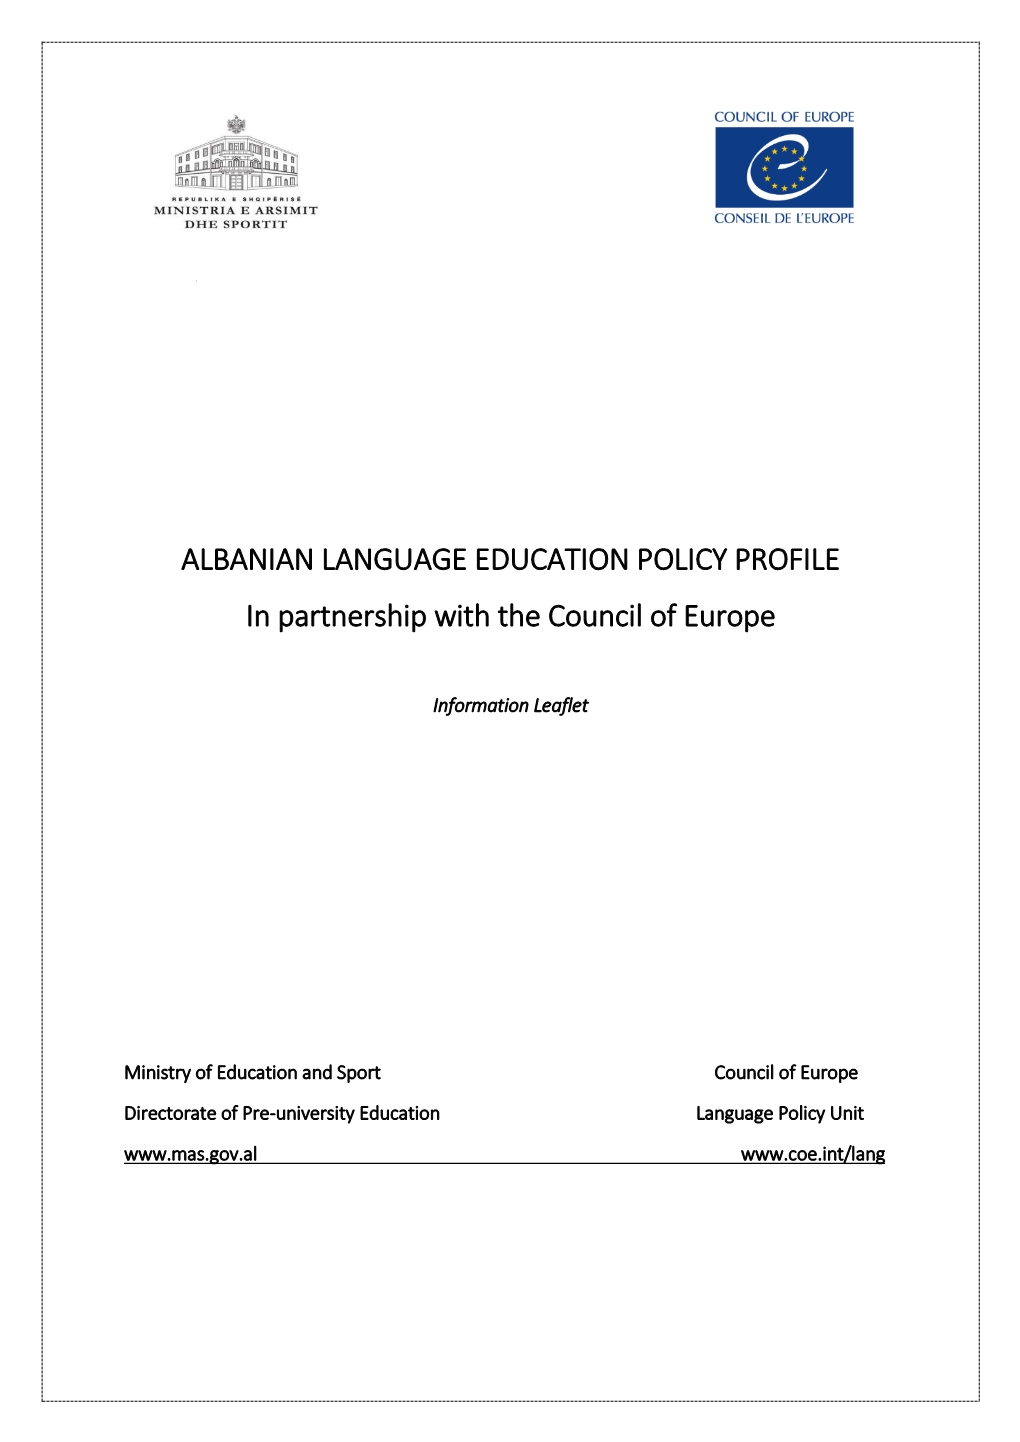 ALBANIAN LANGUAGE EDUCATION POLICY PROFILE in Partnership with the Council of Europe